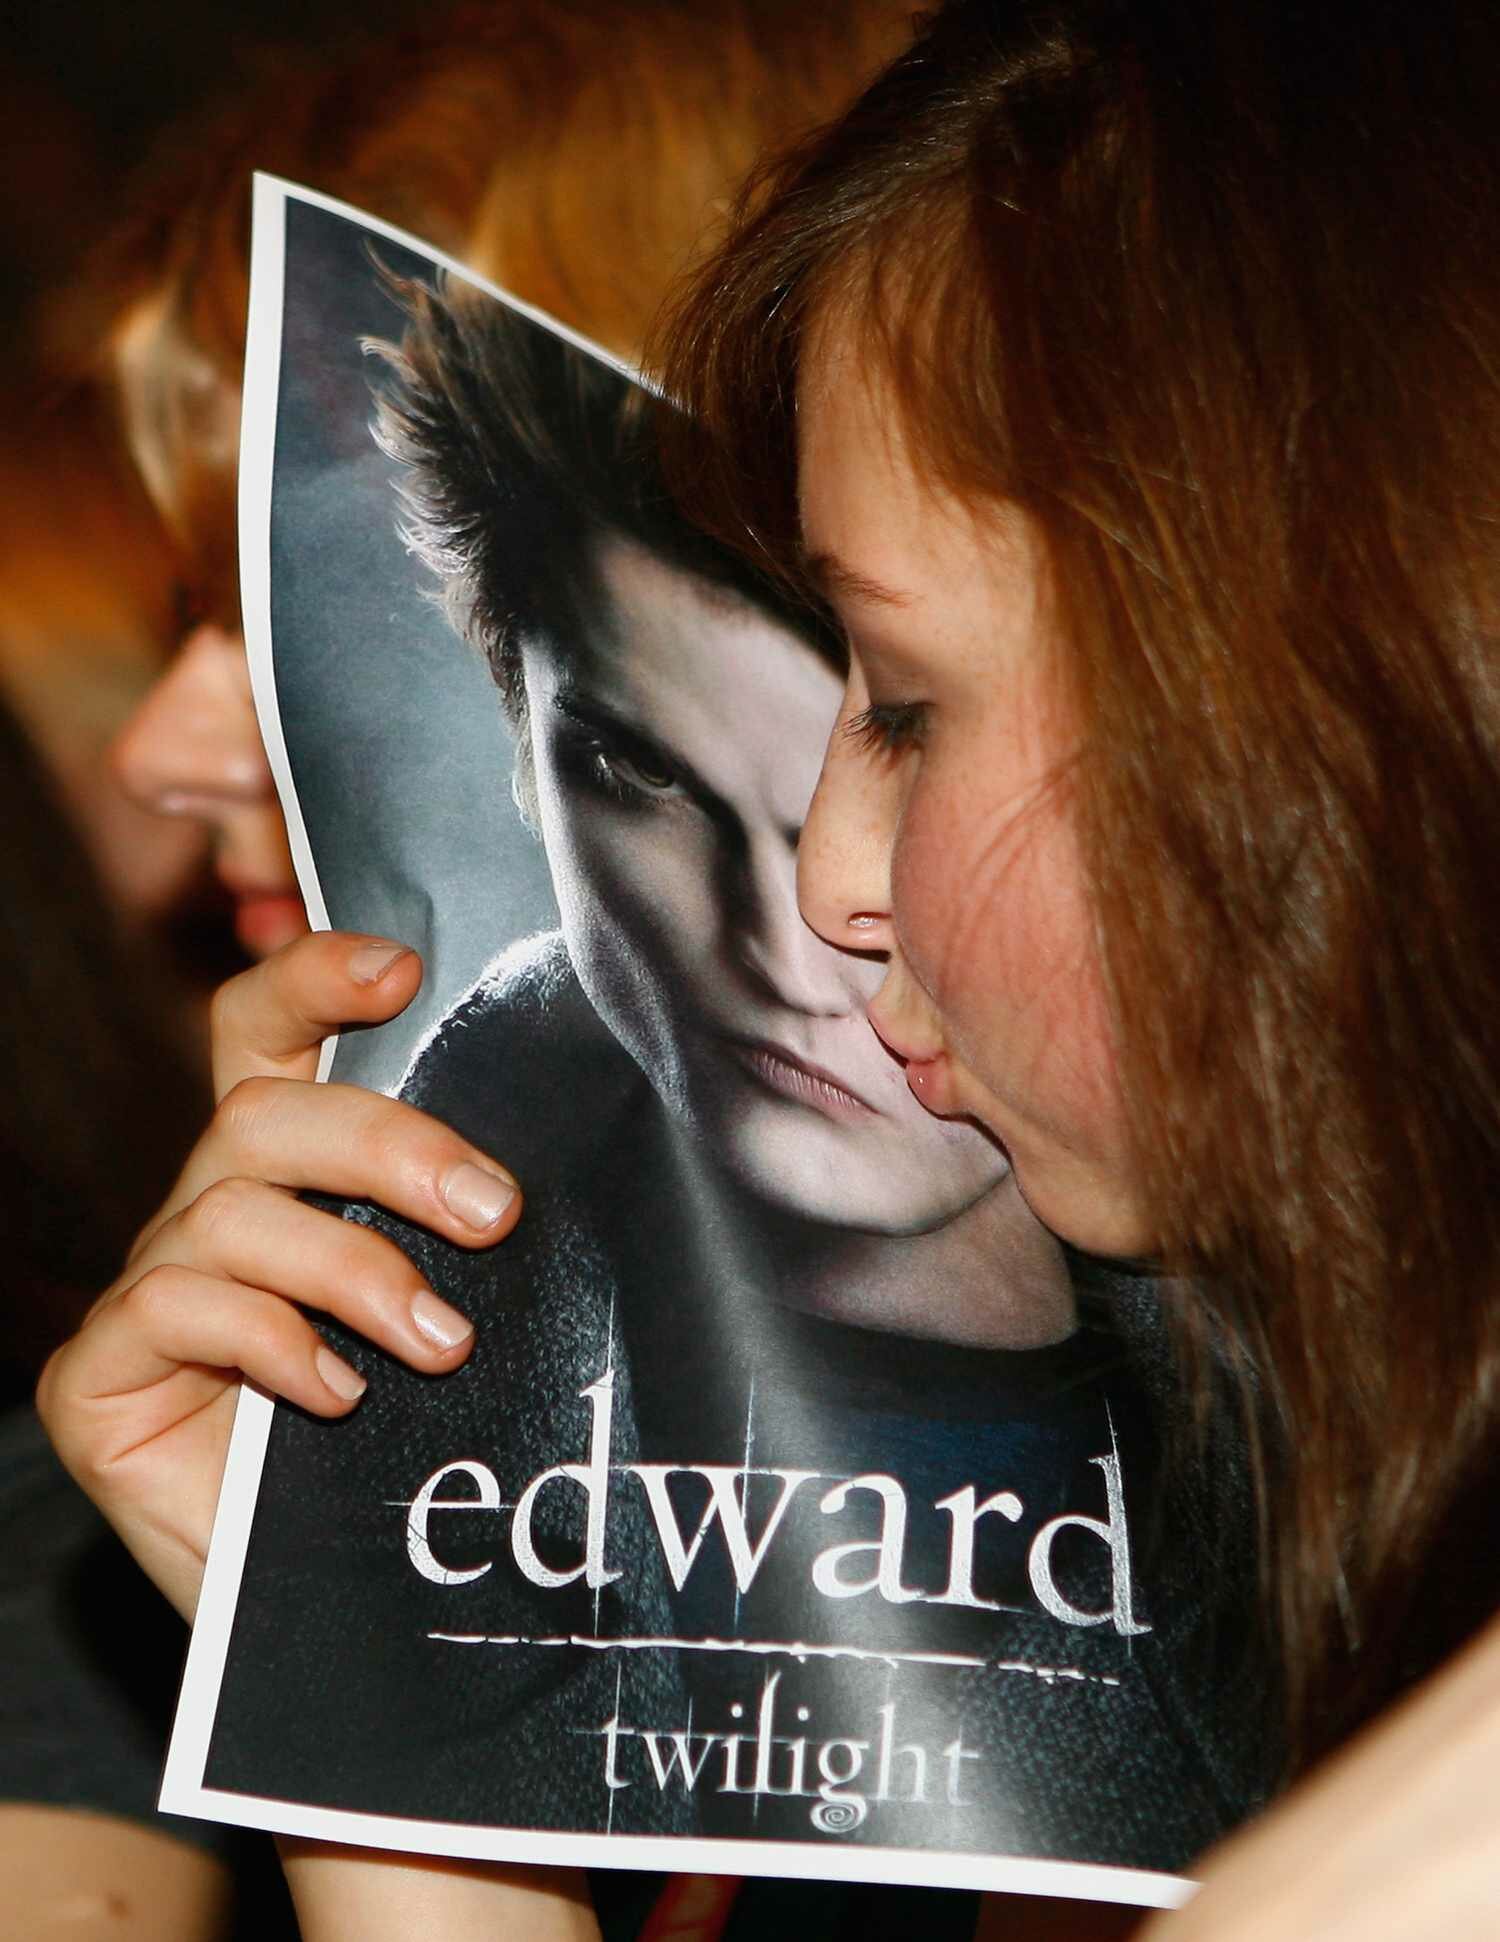 female fan kisses a poster showing the face of actor Robert Pattinson